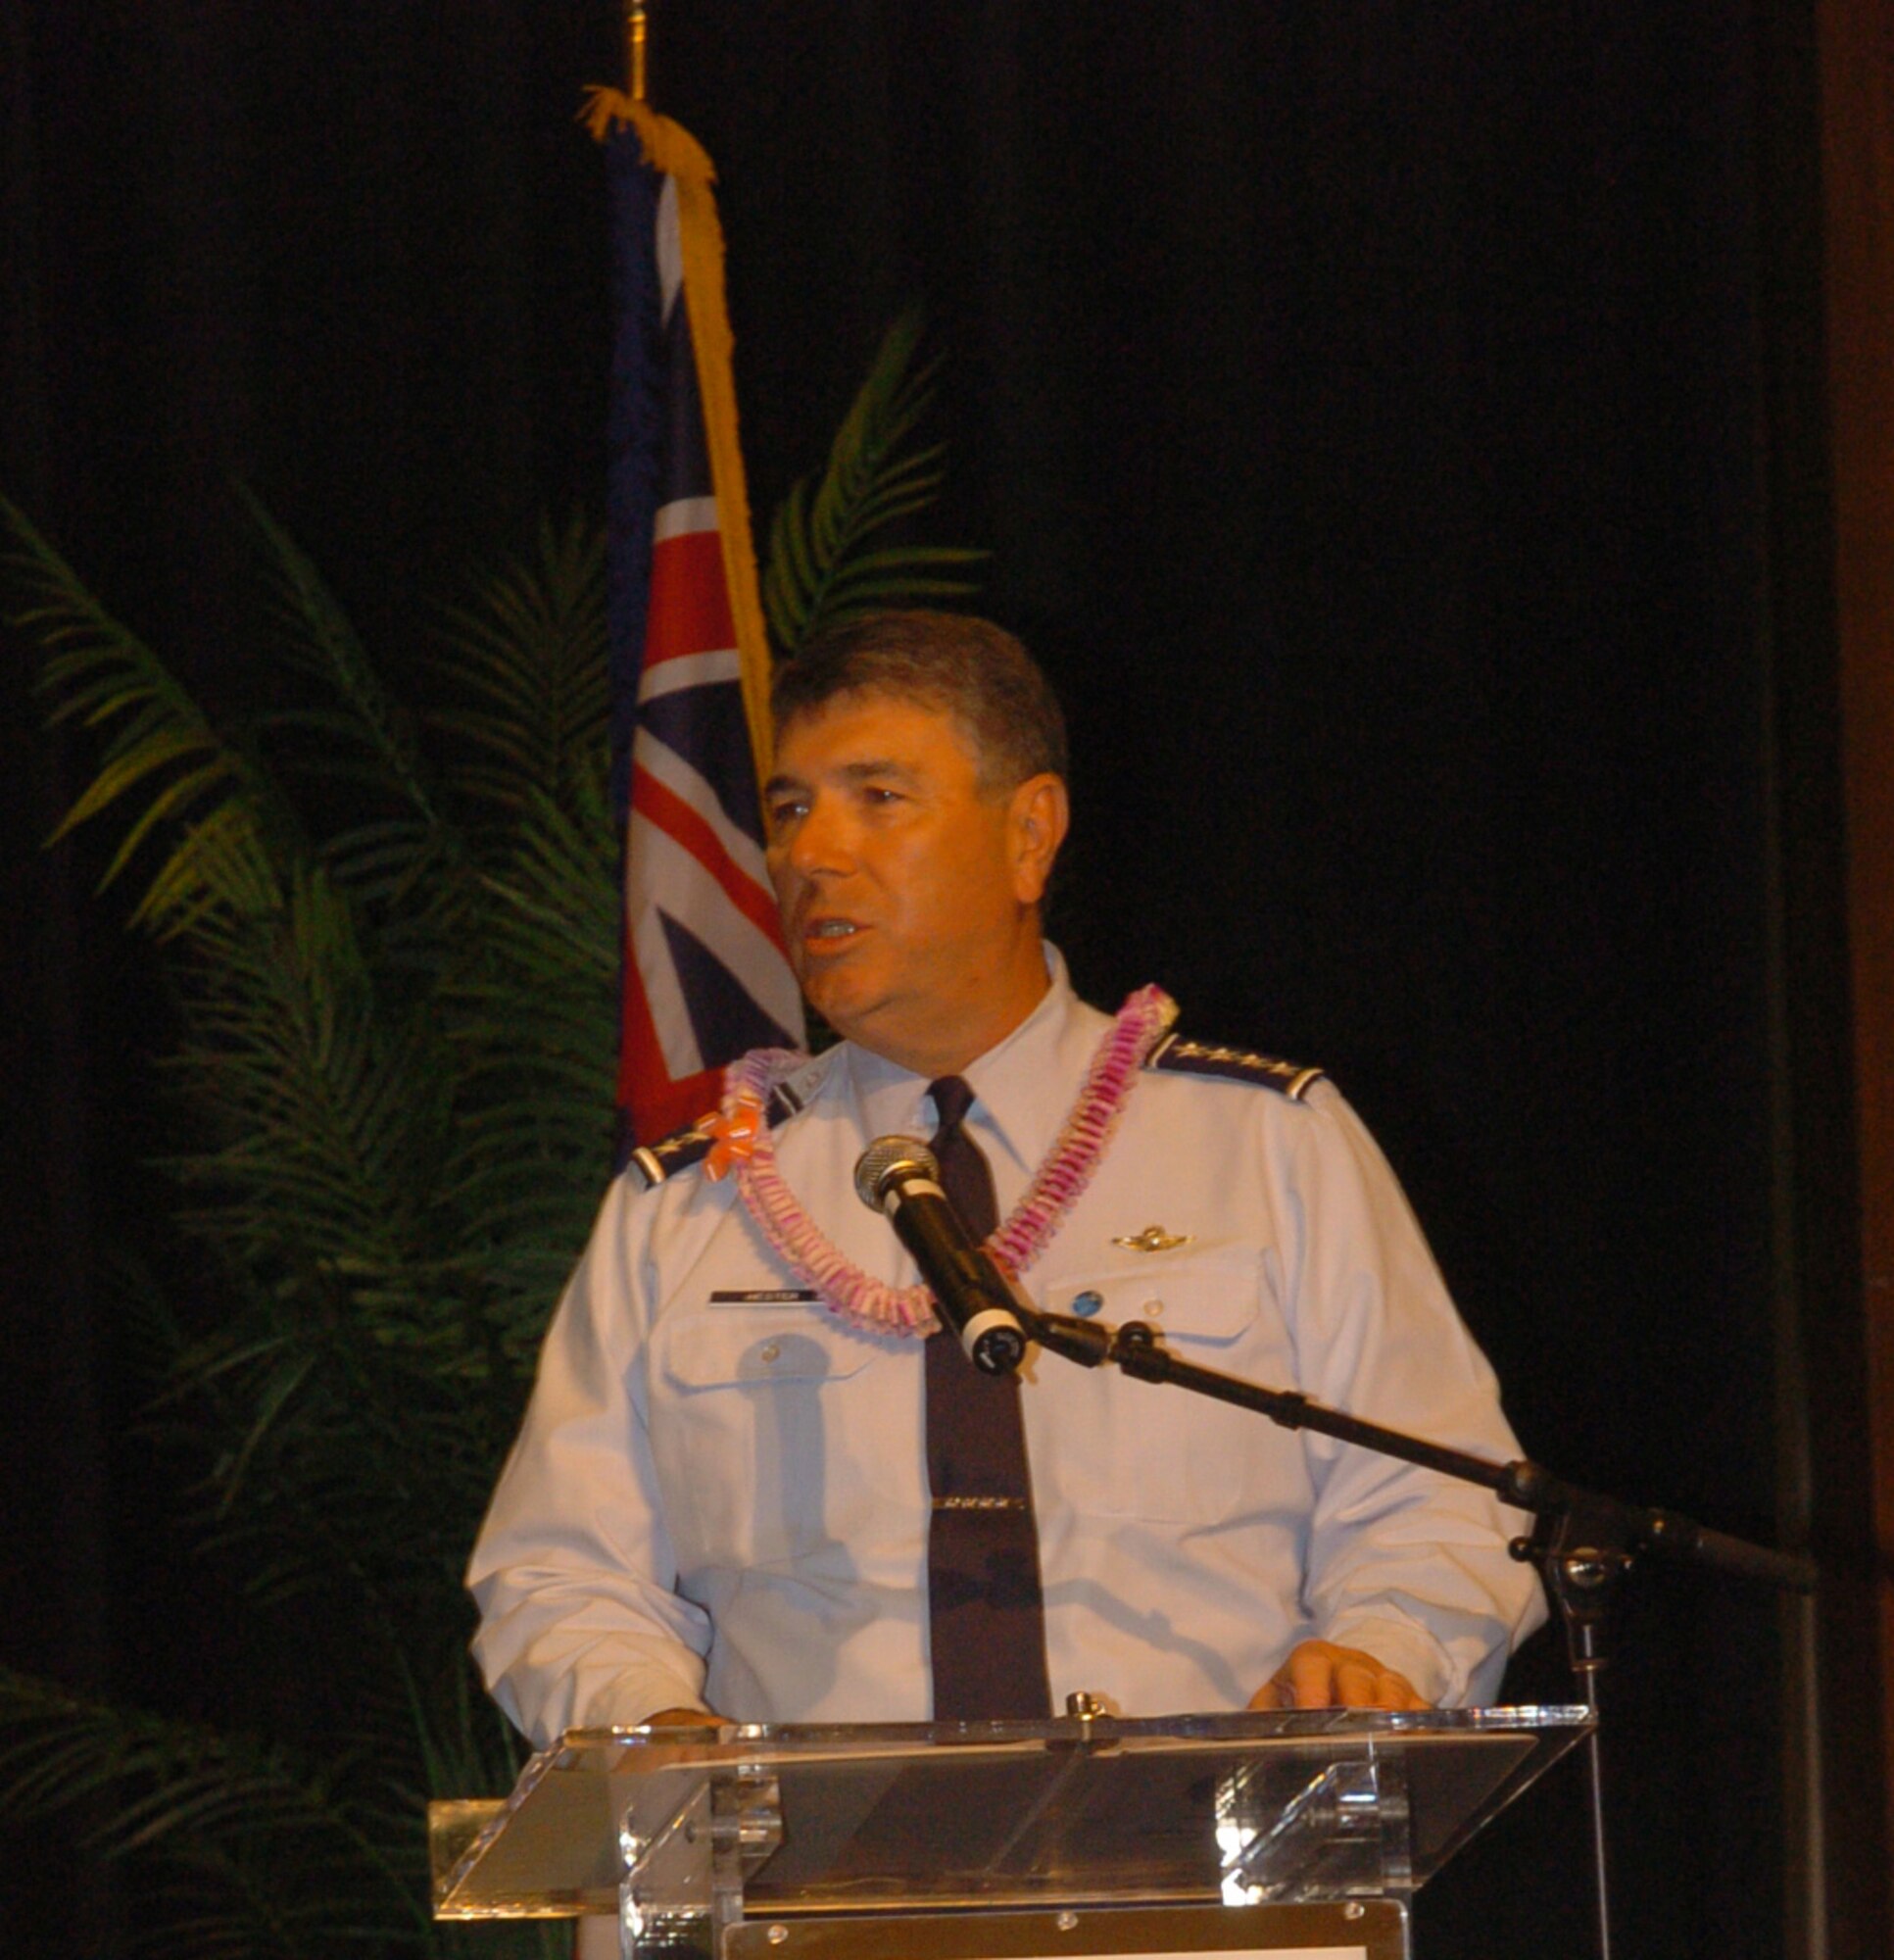 HONOLULU, Hawaii -- Pacific Air Forces commander, General Paul V. Hester addresses members from each branch of service and local community, during the 22nd annual Military Recognition Luncheon at the Hilton Hawaiian Village, Honolulu.  General Hester stressed the great impact local community support has on mission sucess, and the importance of observing Memorial Day.  (Air Force photo by Angela Elbern)